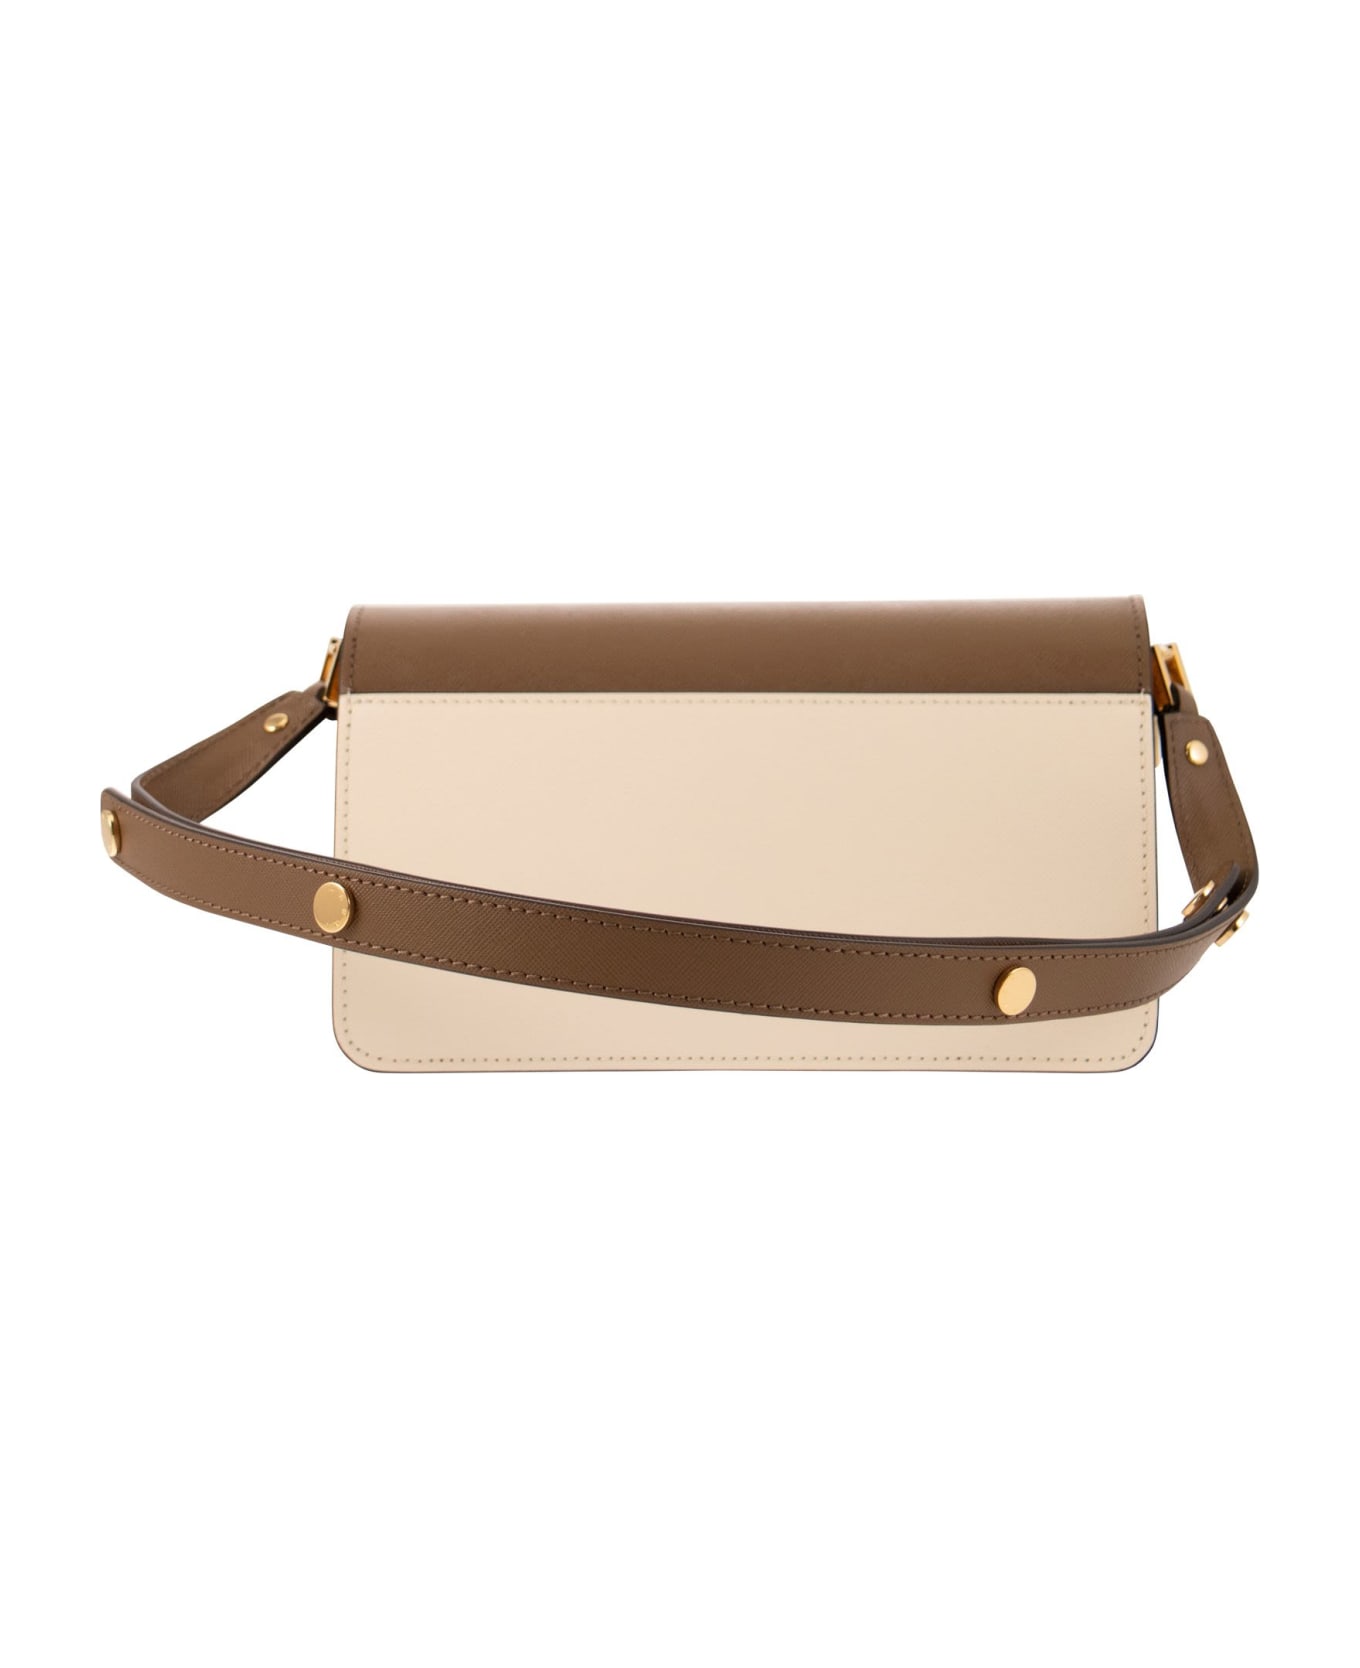 Marni White And Brown East/west Trunk Bag In Saffiano Leather - Brown